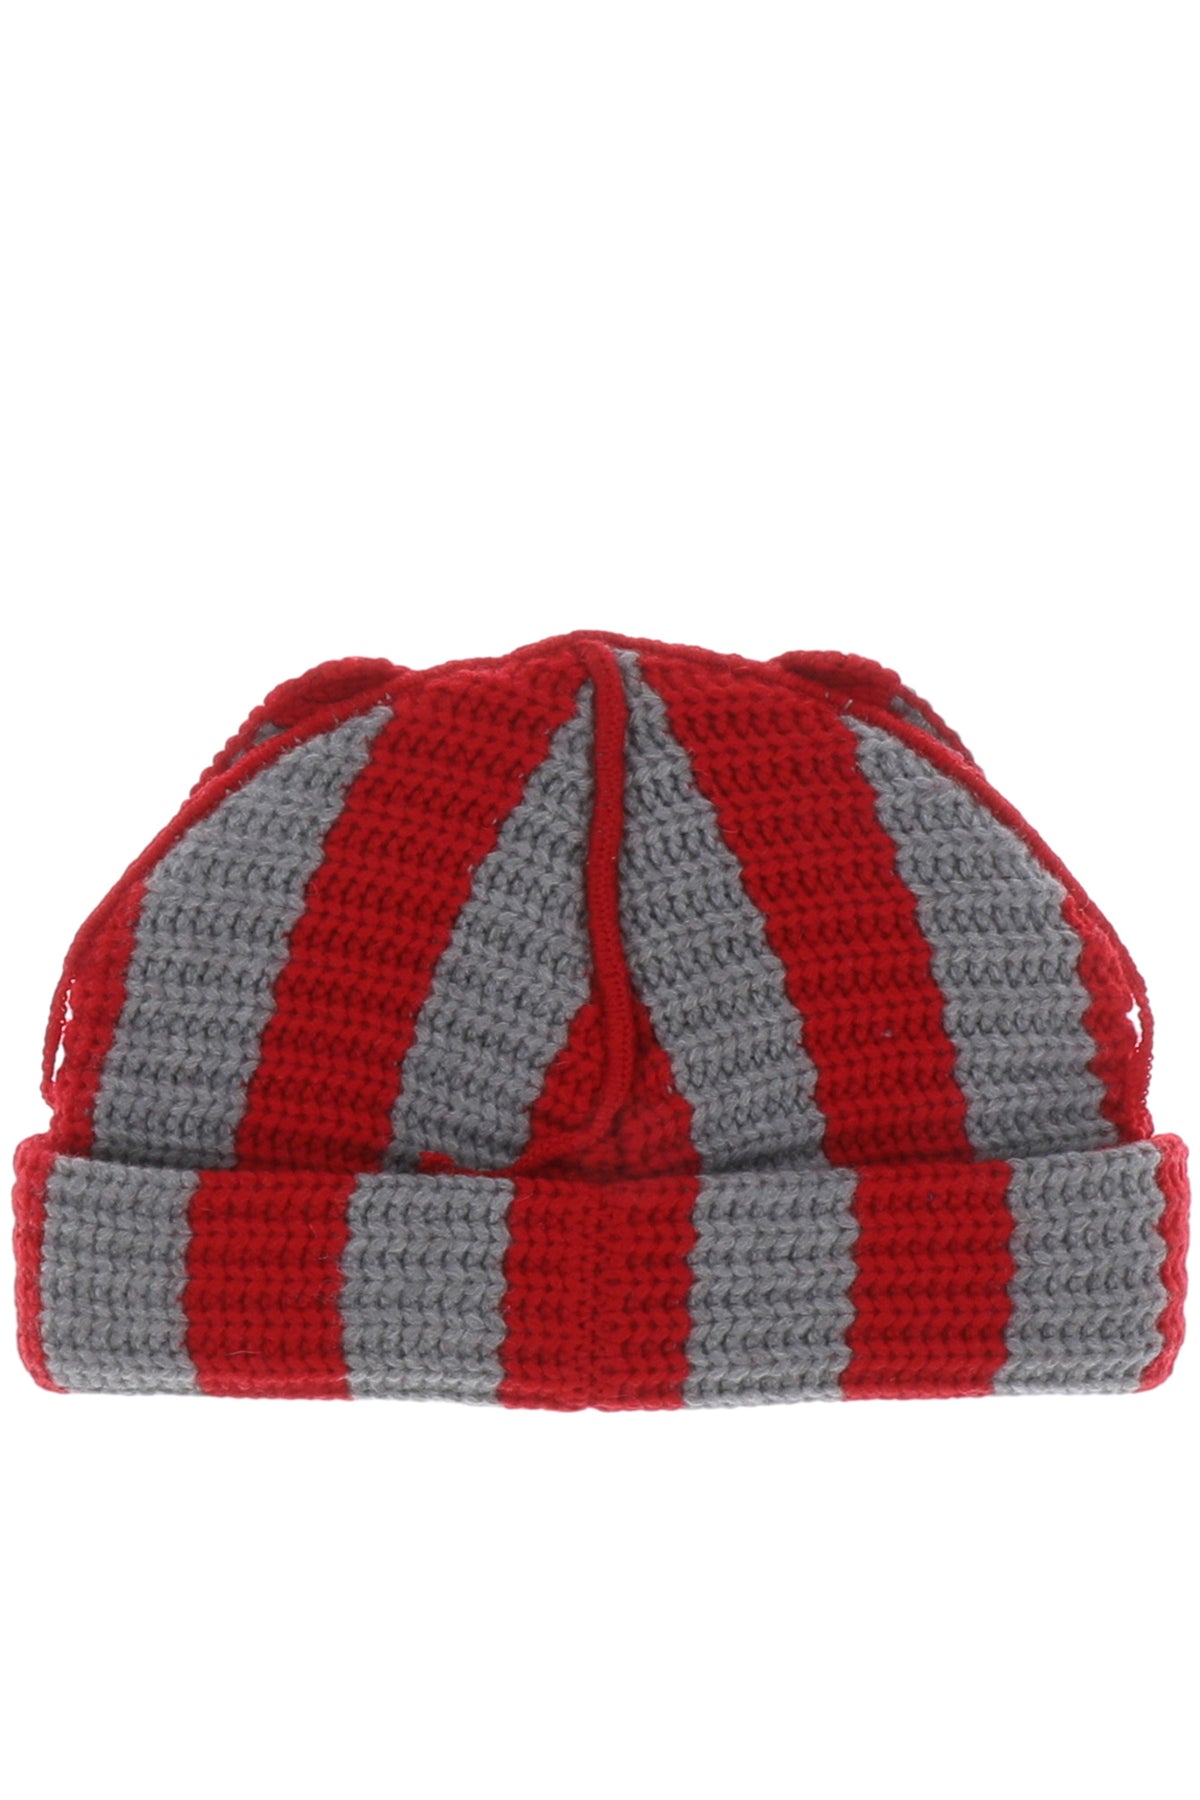 STRIPED EARS BEANIE / RED GRY